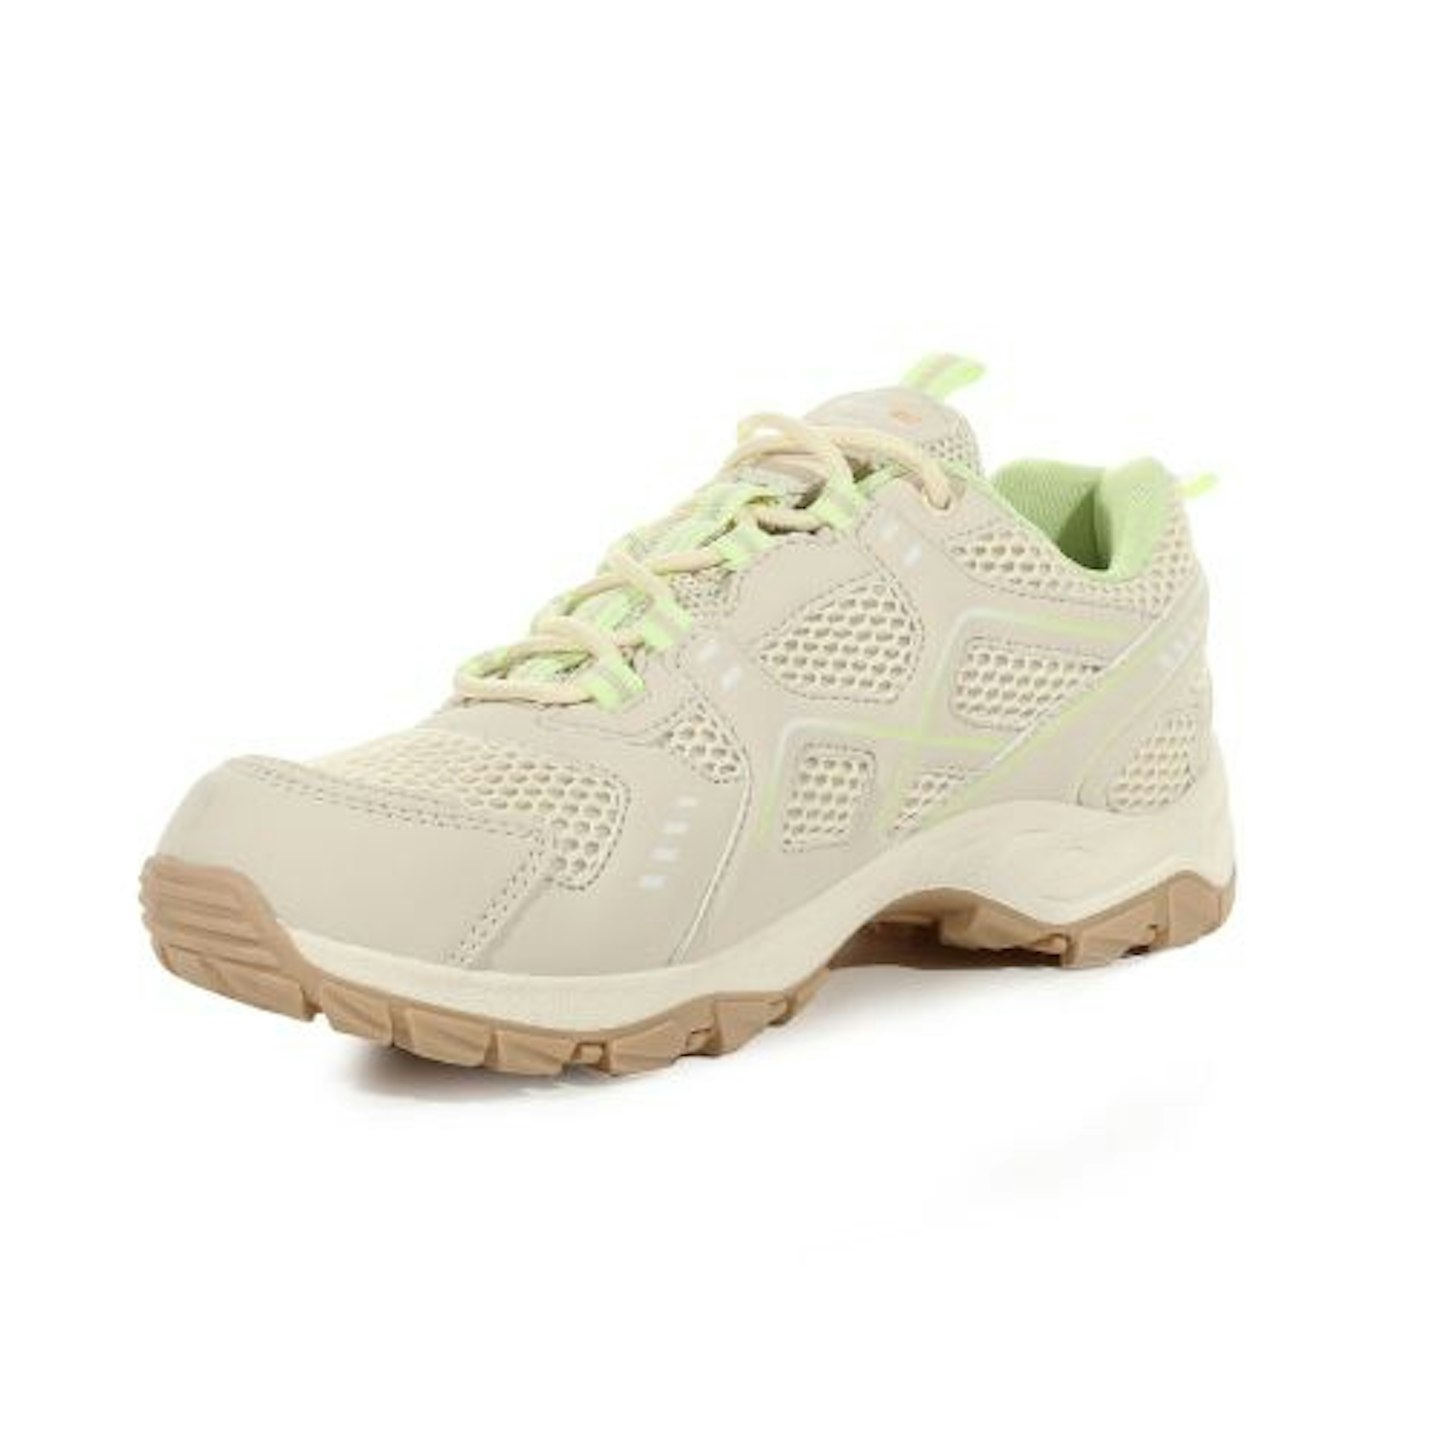 Lady Vendeavour Walking Shoes | Barley White Lime Cream